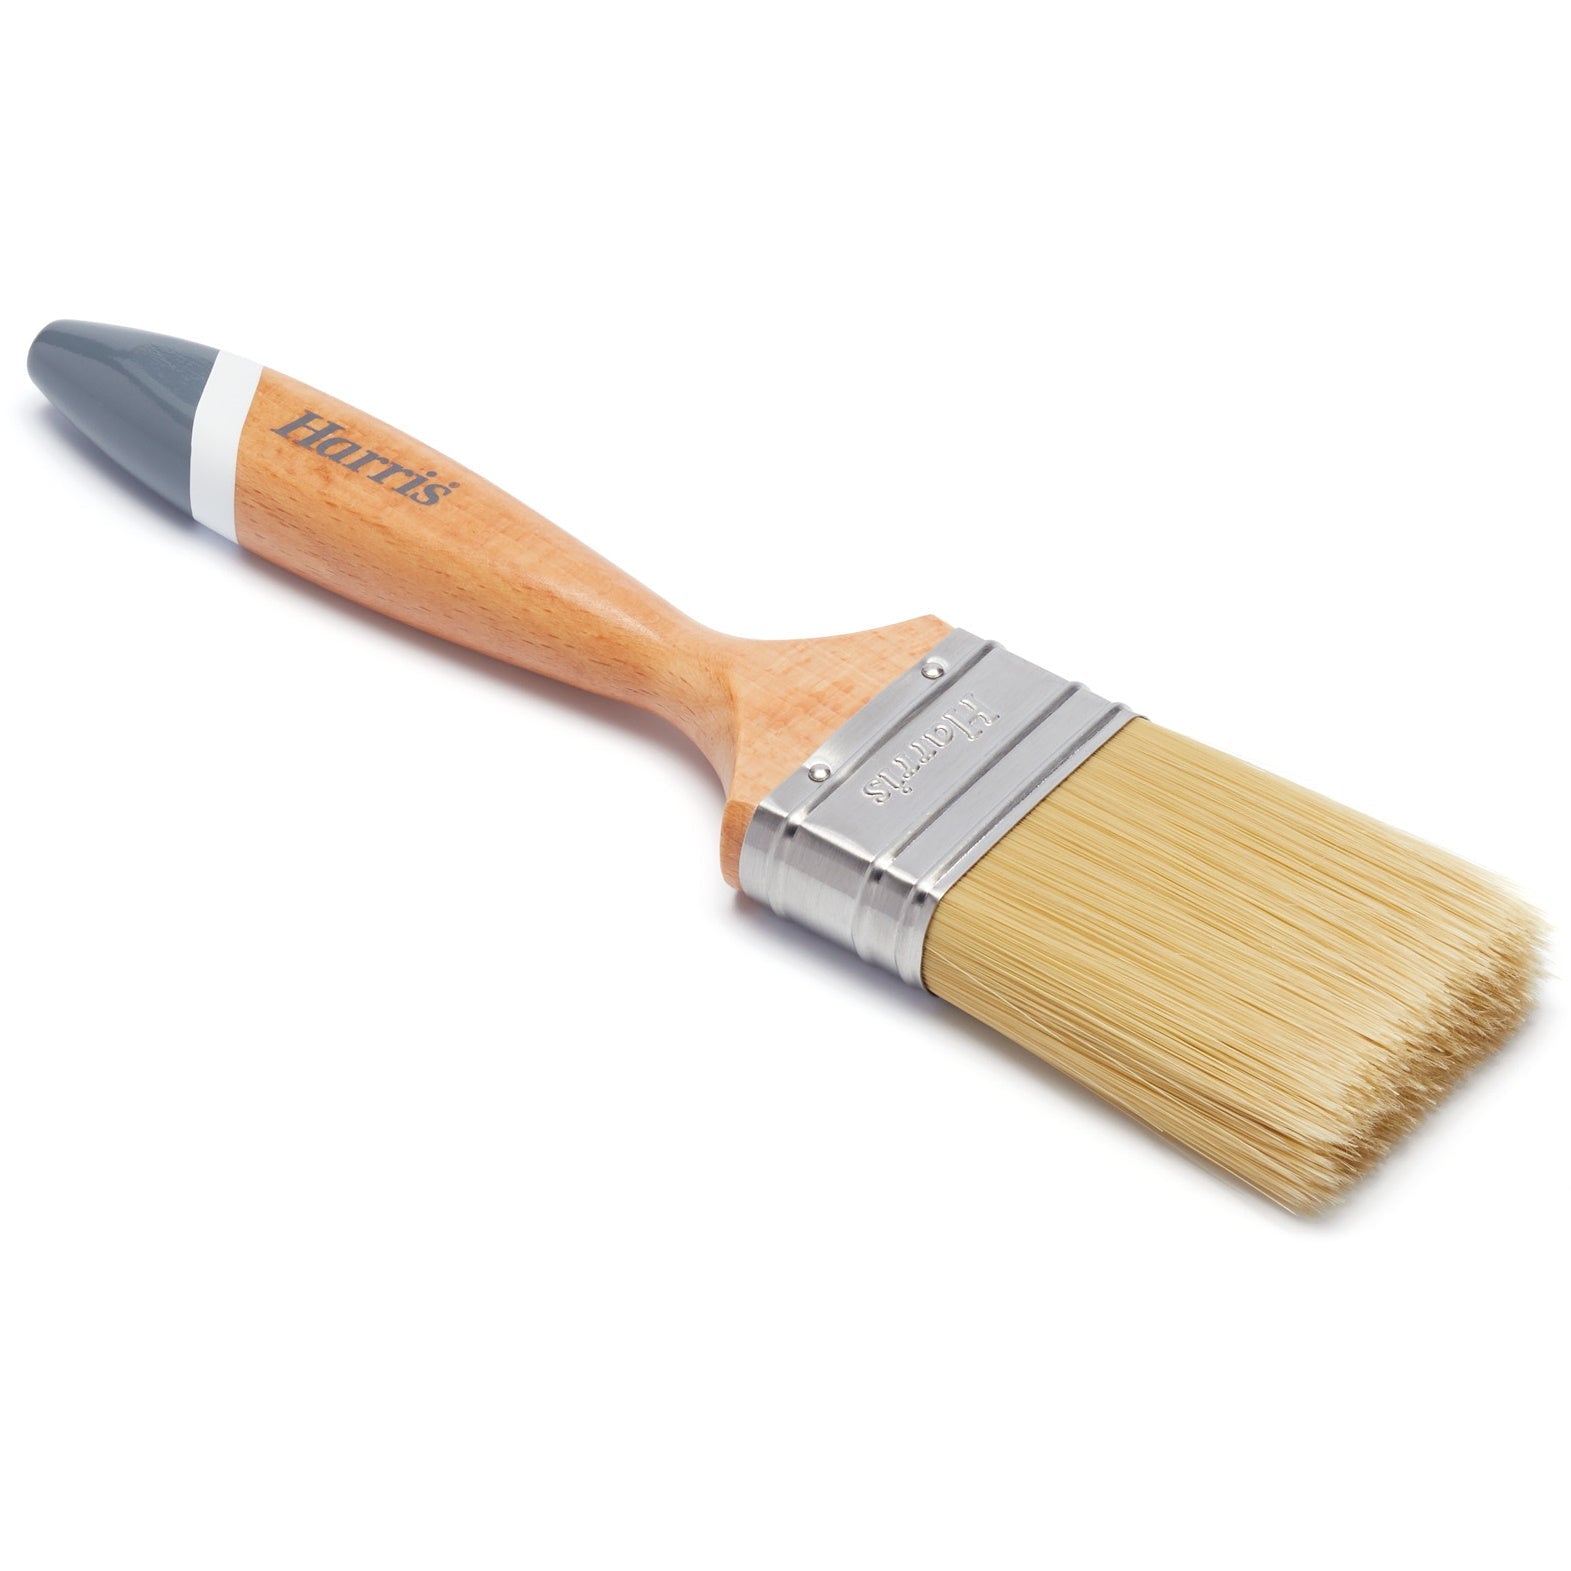 Harris Ultimate Woodwork Stain & Varnish Paint Brushes - Various Sizes - Premium Paint Brushes from HARRIS - Just $2.99! Shop now at W Hurst & Son (IW) Ltd